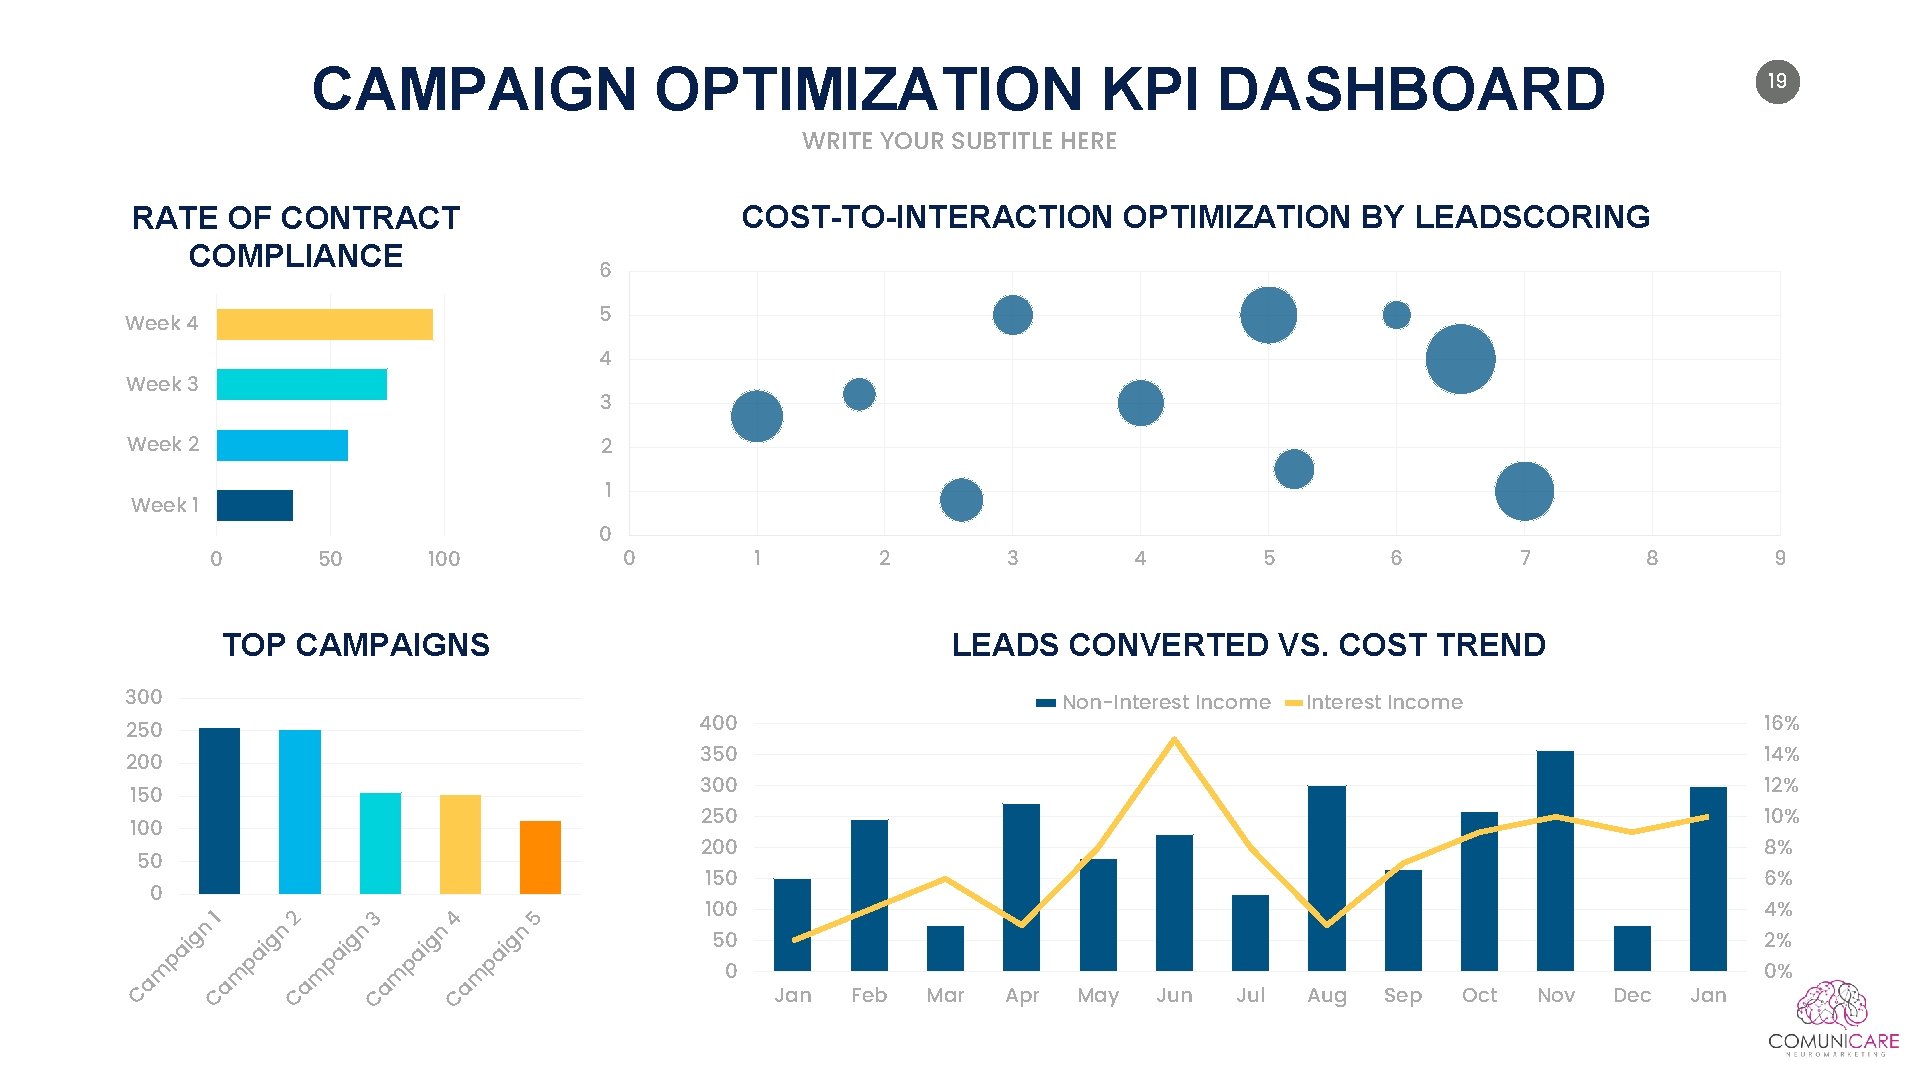 CAMPAIGN OPTIMIZATION KPI DASHBOARD 19 WRITE YOUR SUBTITLE HERE COST-TO-INTERACTION OPTIMIZATION BY LEADSCORING RATE